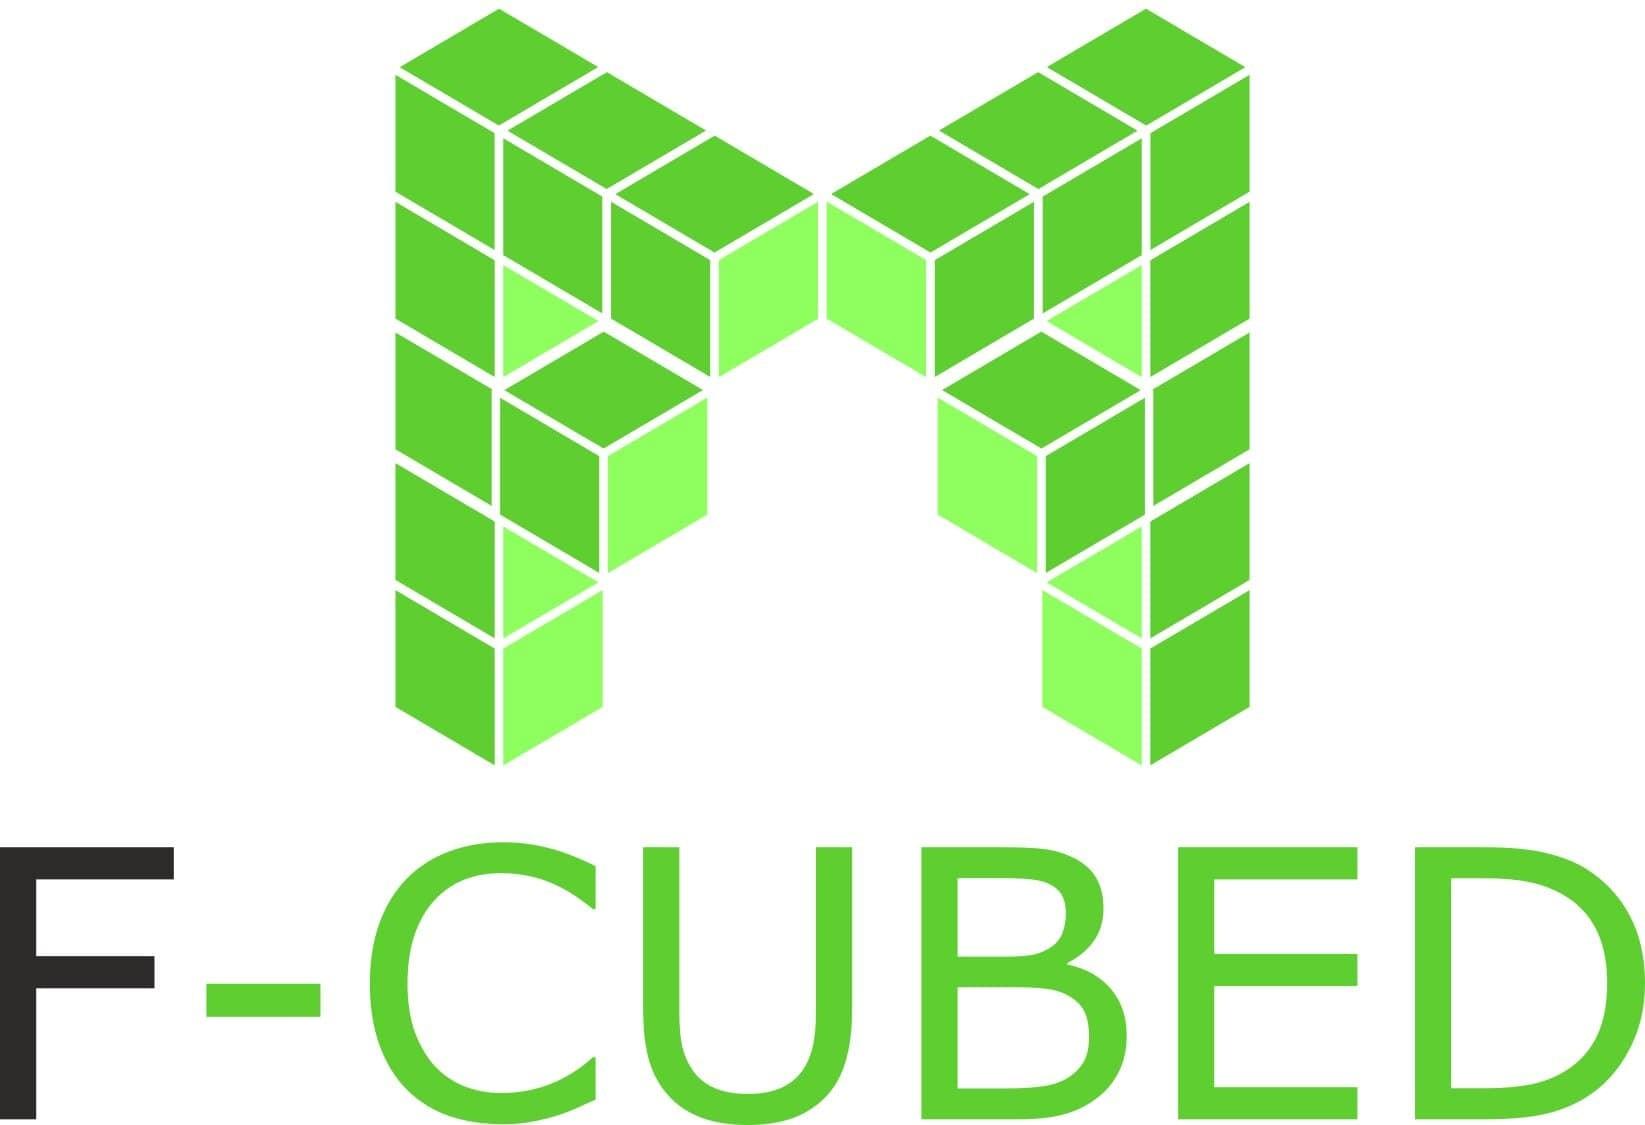 F-CUBED project logo